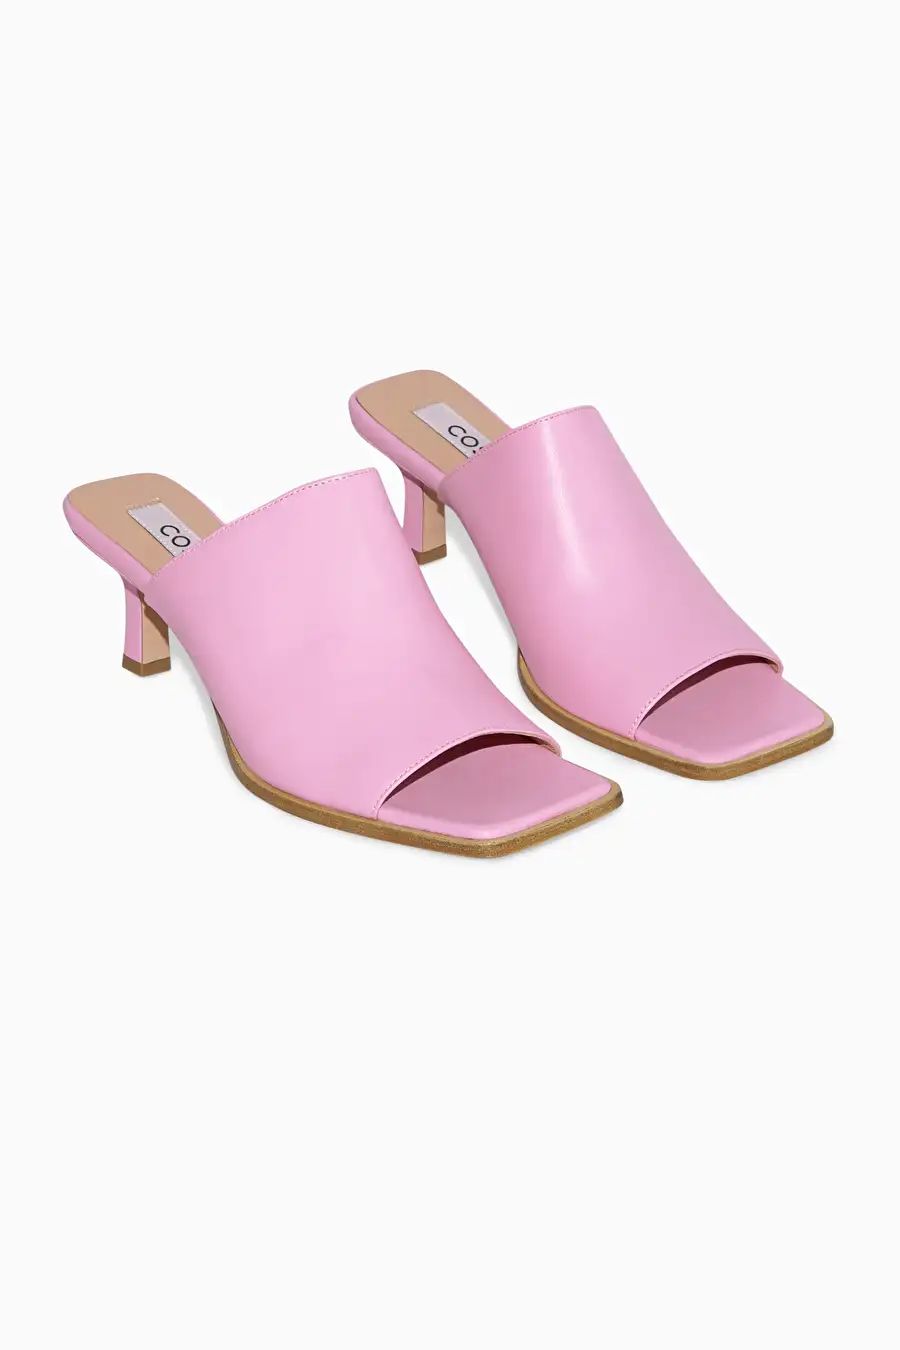 LEATHER MULES - PINK - COS | COS (EU)